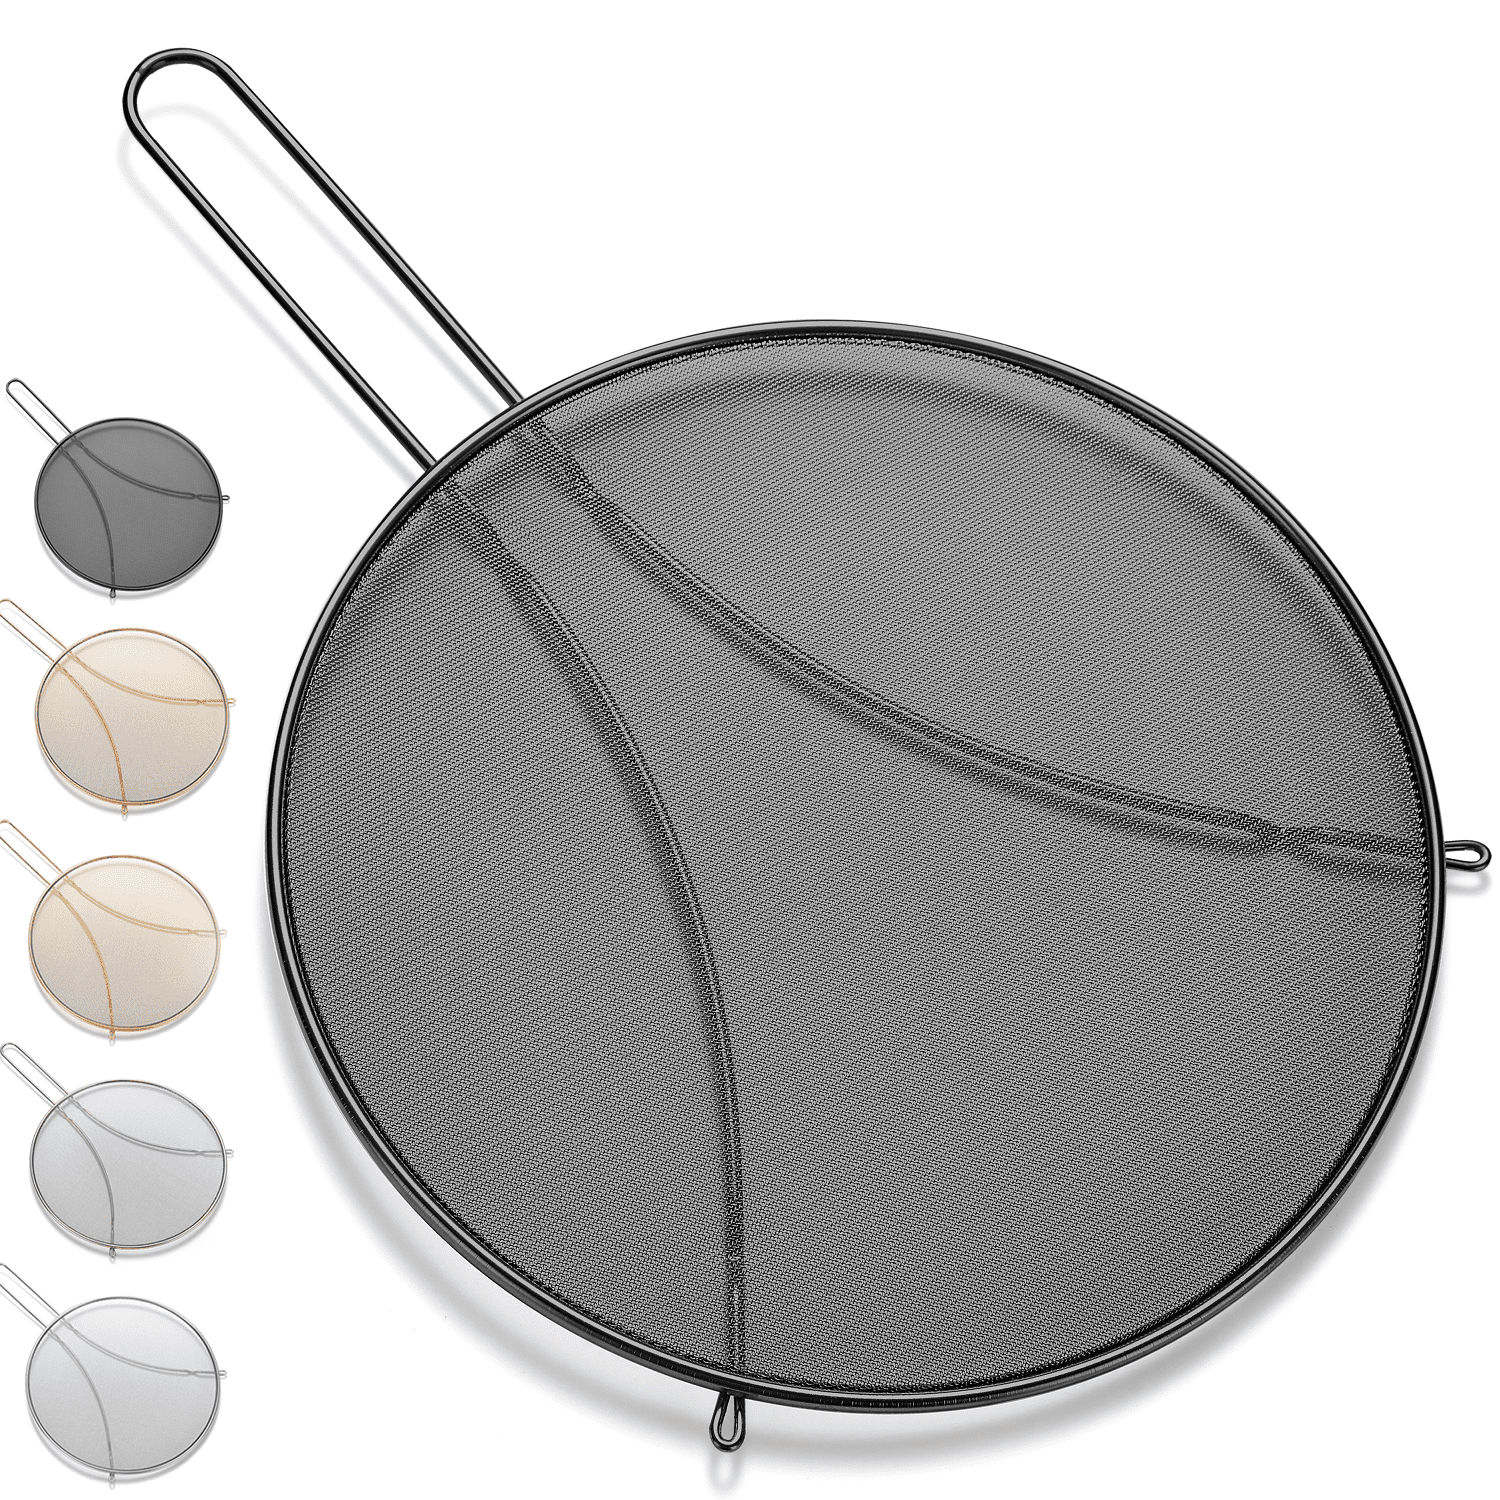 Anti Grease Splash Scald Proof Frying Pan Cover Cooking Tools Stainless Steel Splatter Screen With ABS Handl 